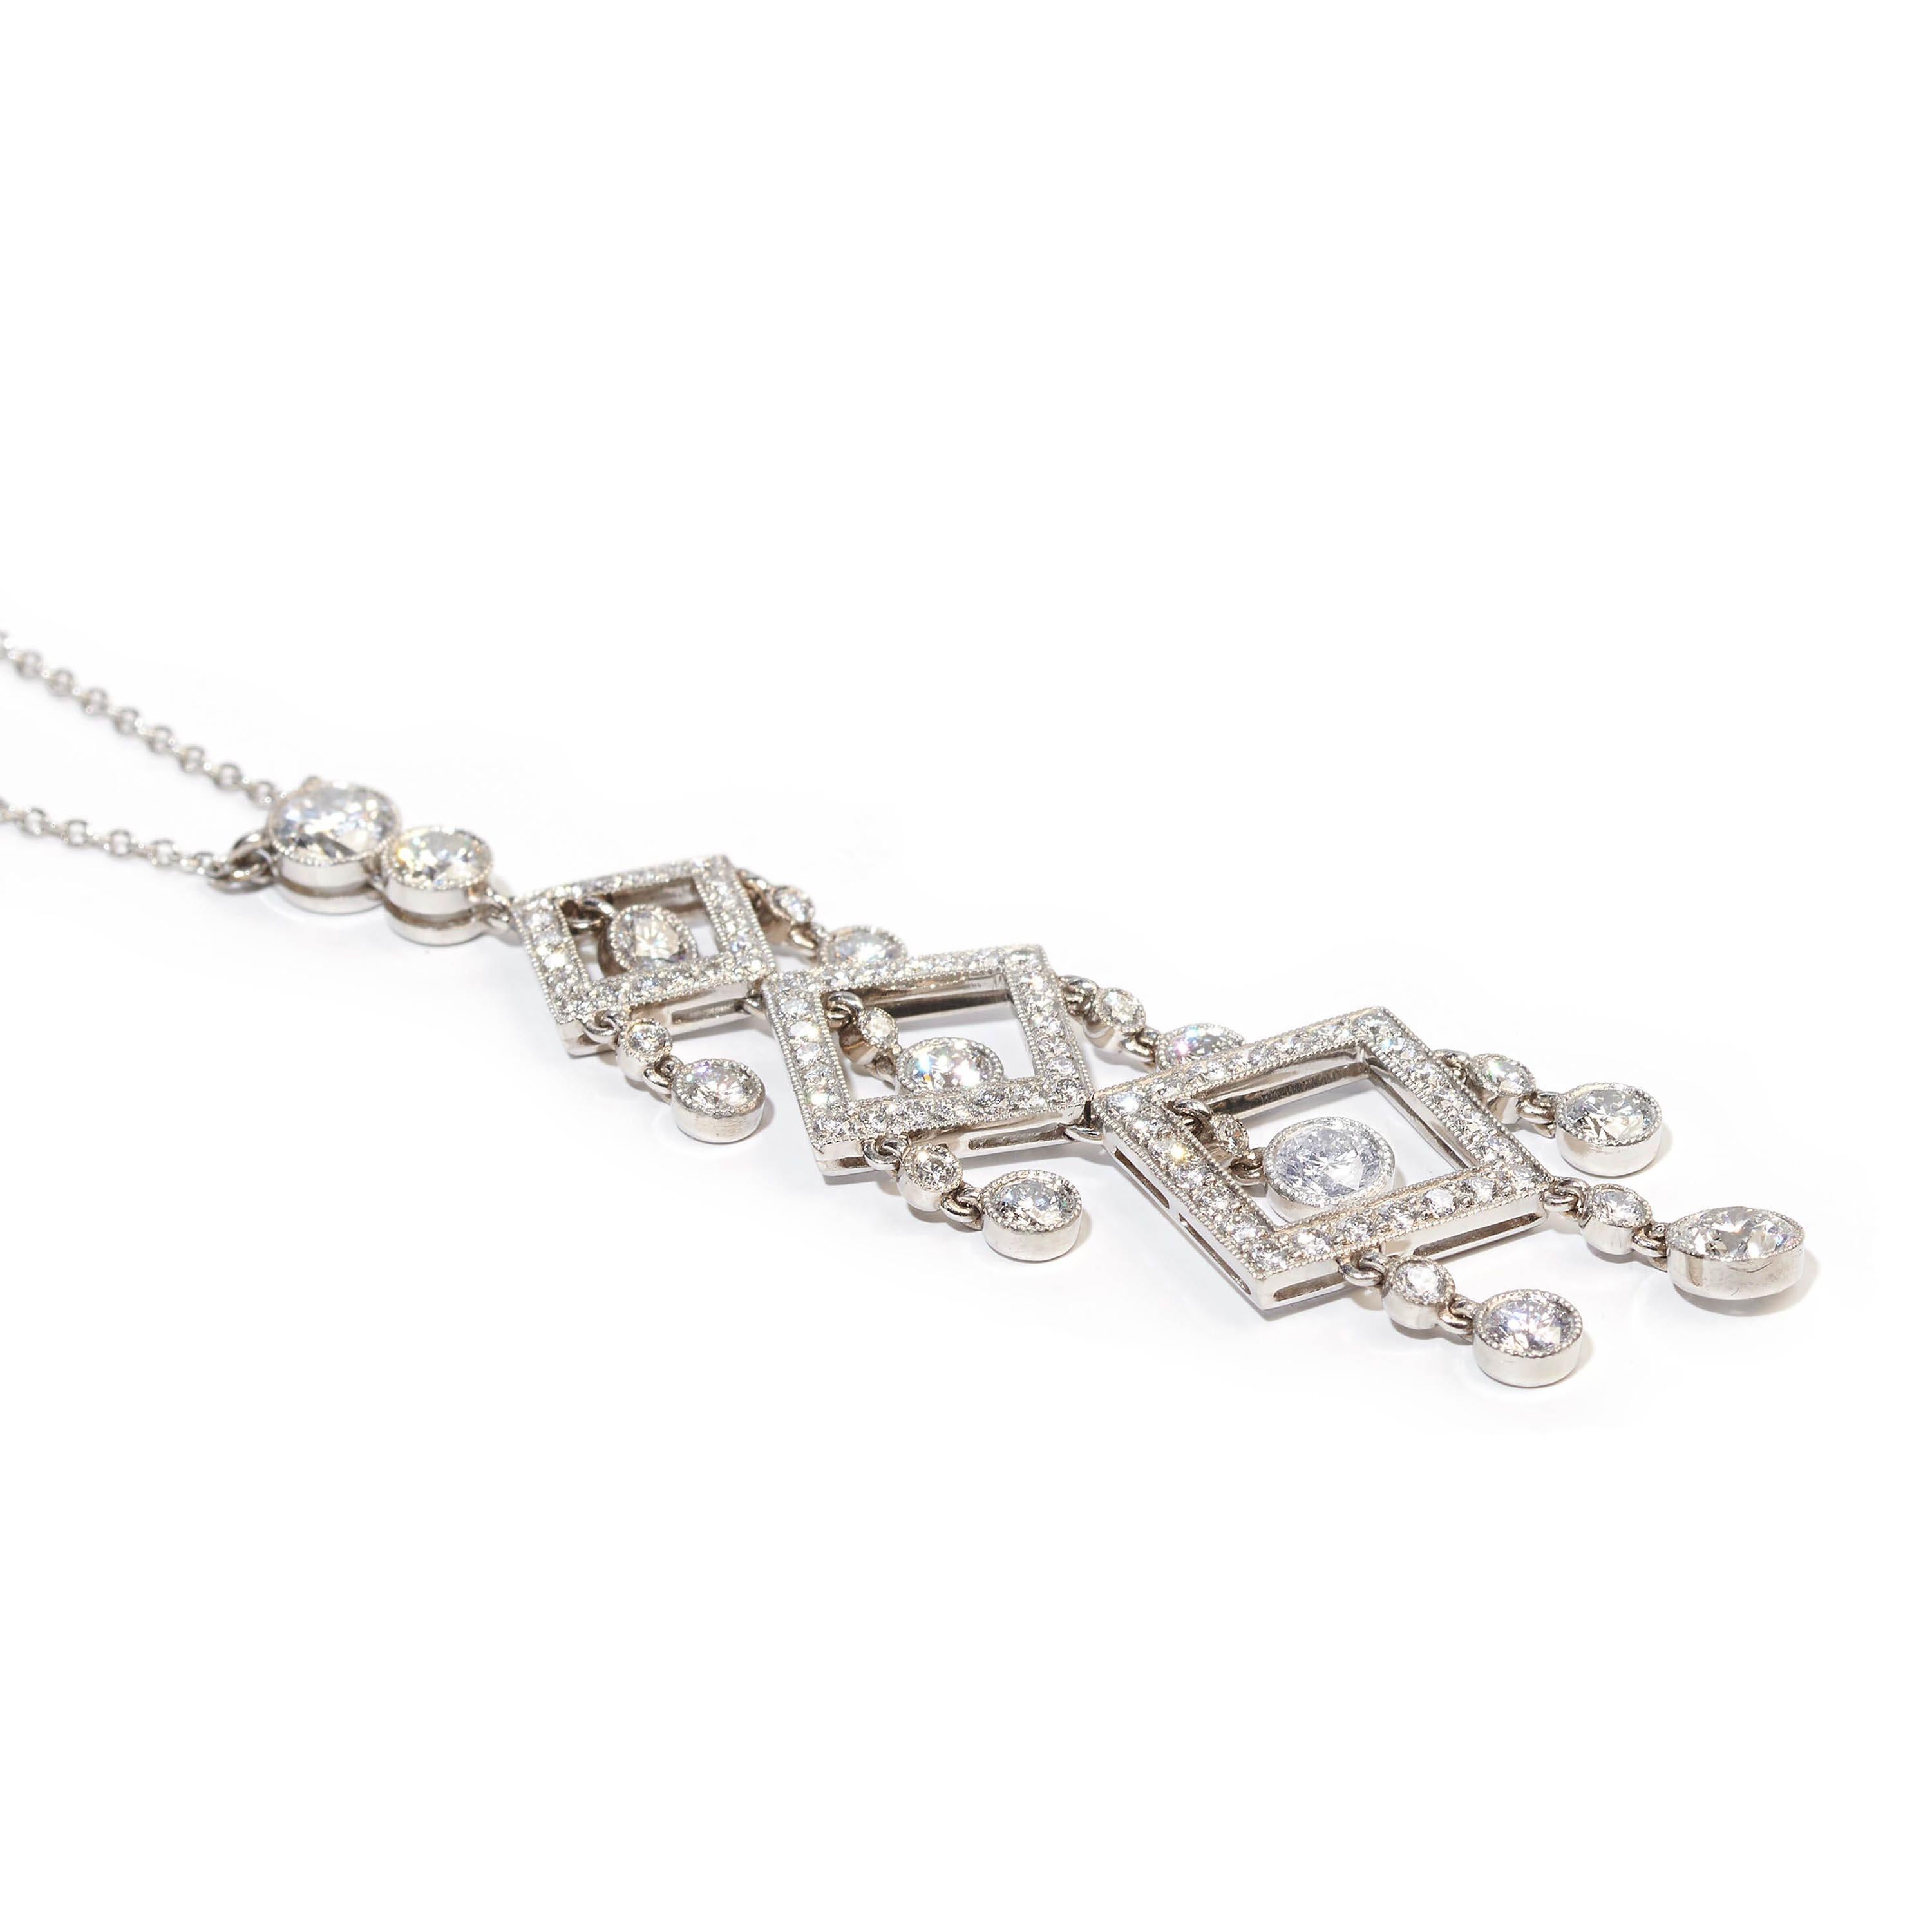 A diamond and platinum pendant, of three graduating open squares, with grain set, round brilliant-cut, diamonds, with two diamonds above and diamond drop pendants in the centre of the squares and suspending from the sides, in rub over settings, with